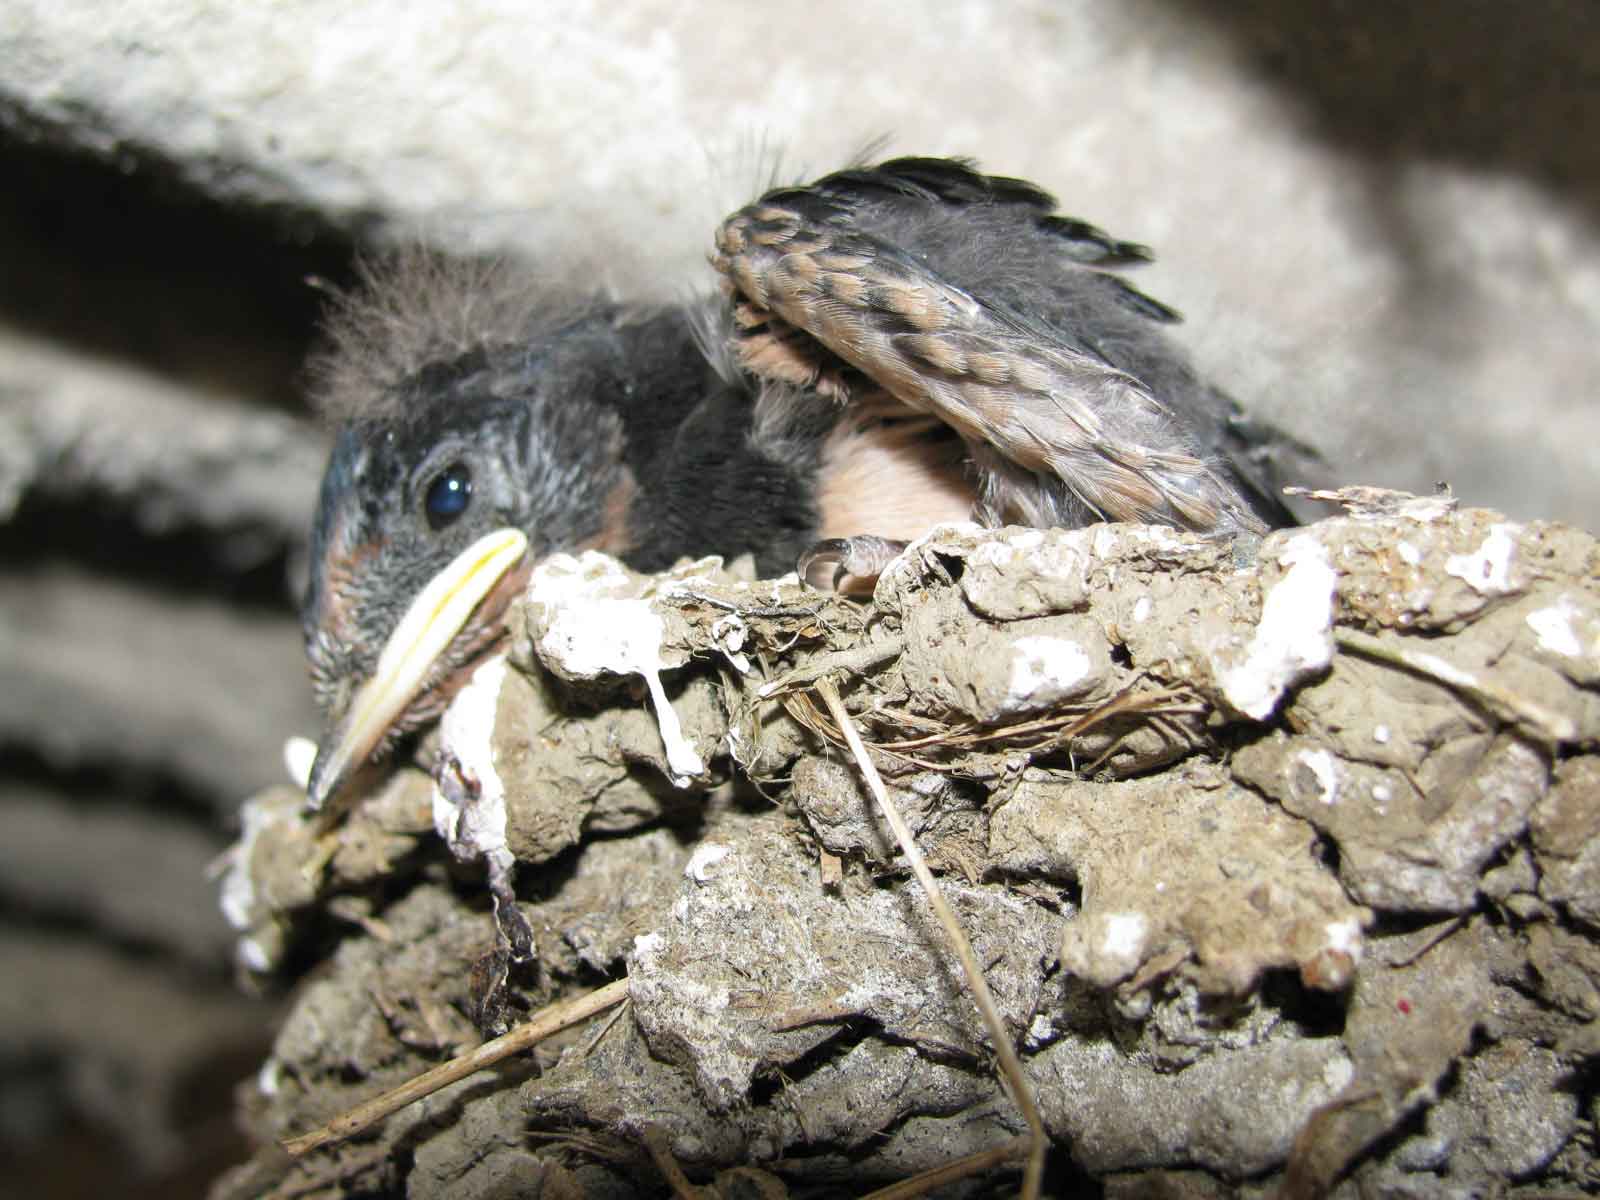 A fed up swallow chick